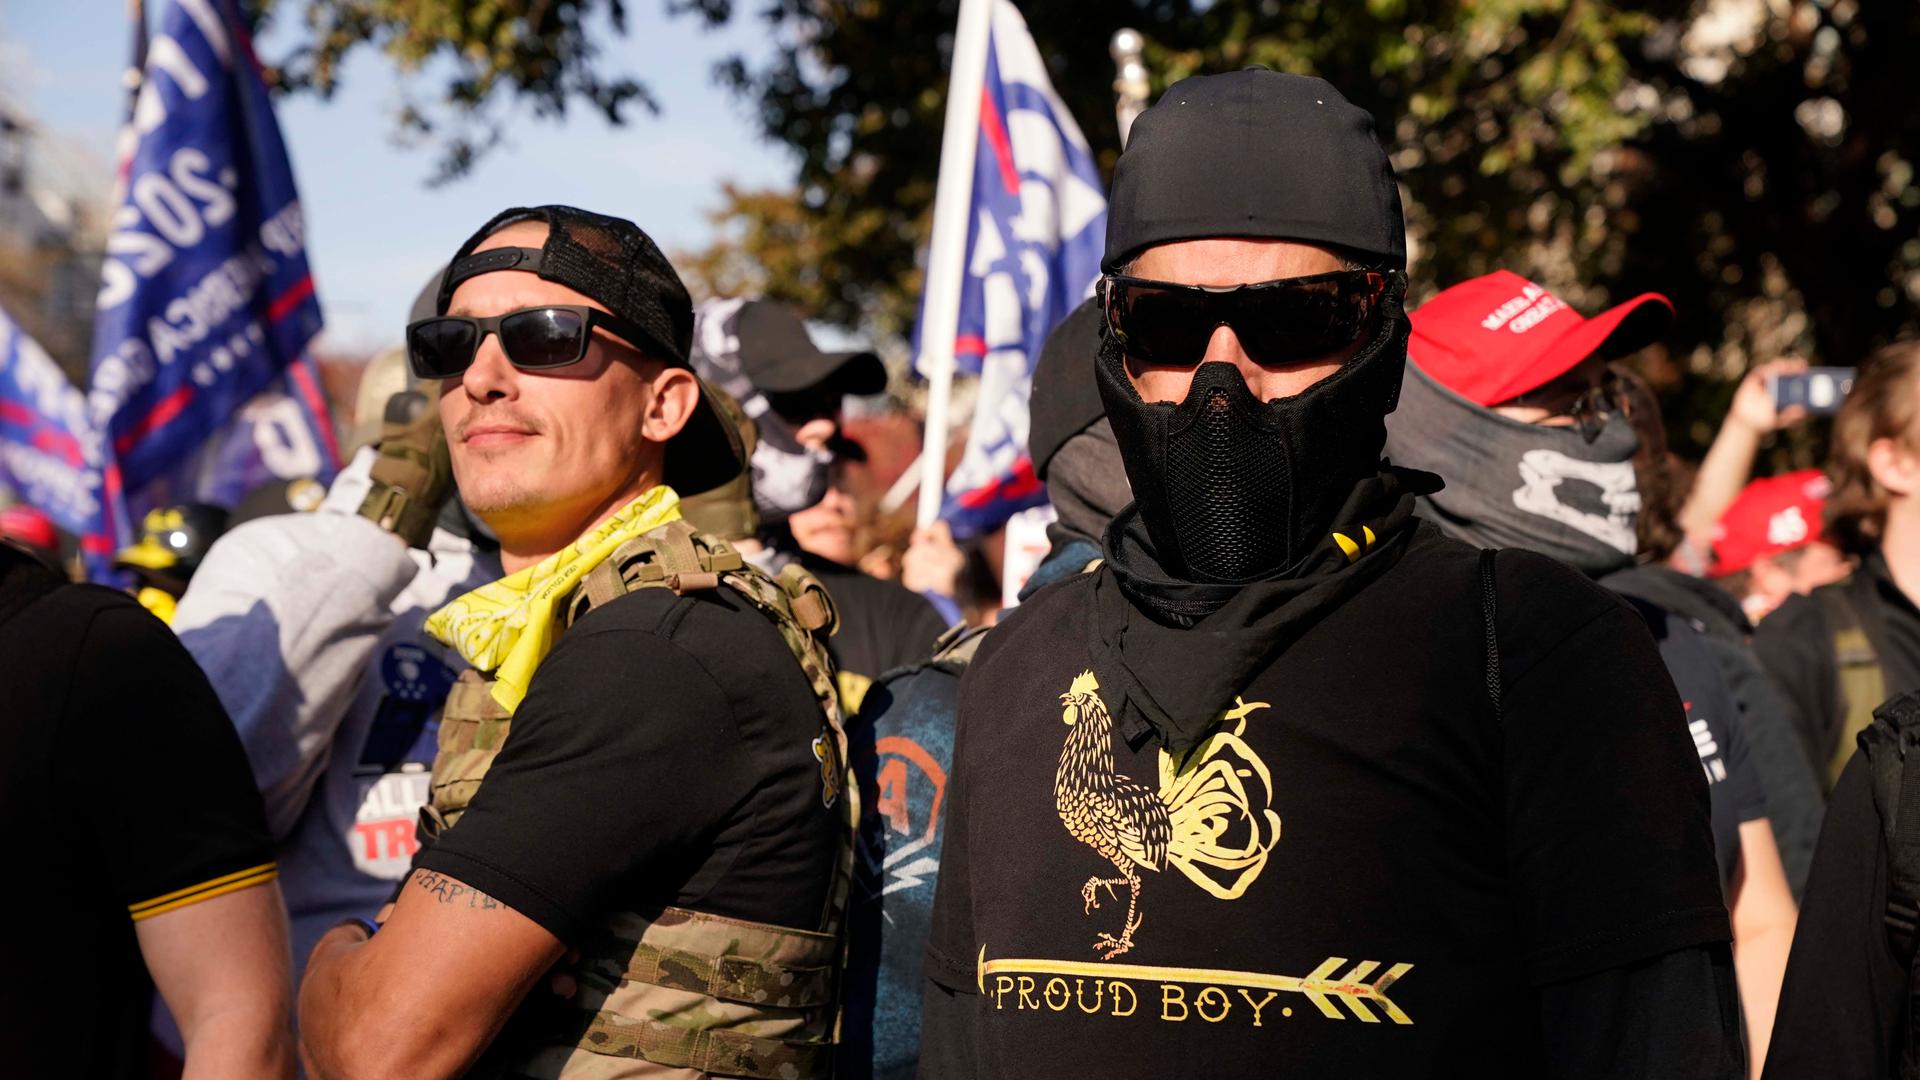 People wearing shirts with Proud Boys on them join supporters of President Donald Trump in a march Nov. 14, 2020, in Washington, DC.